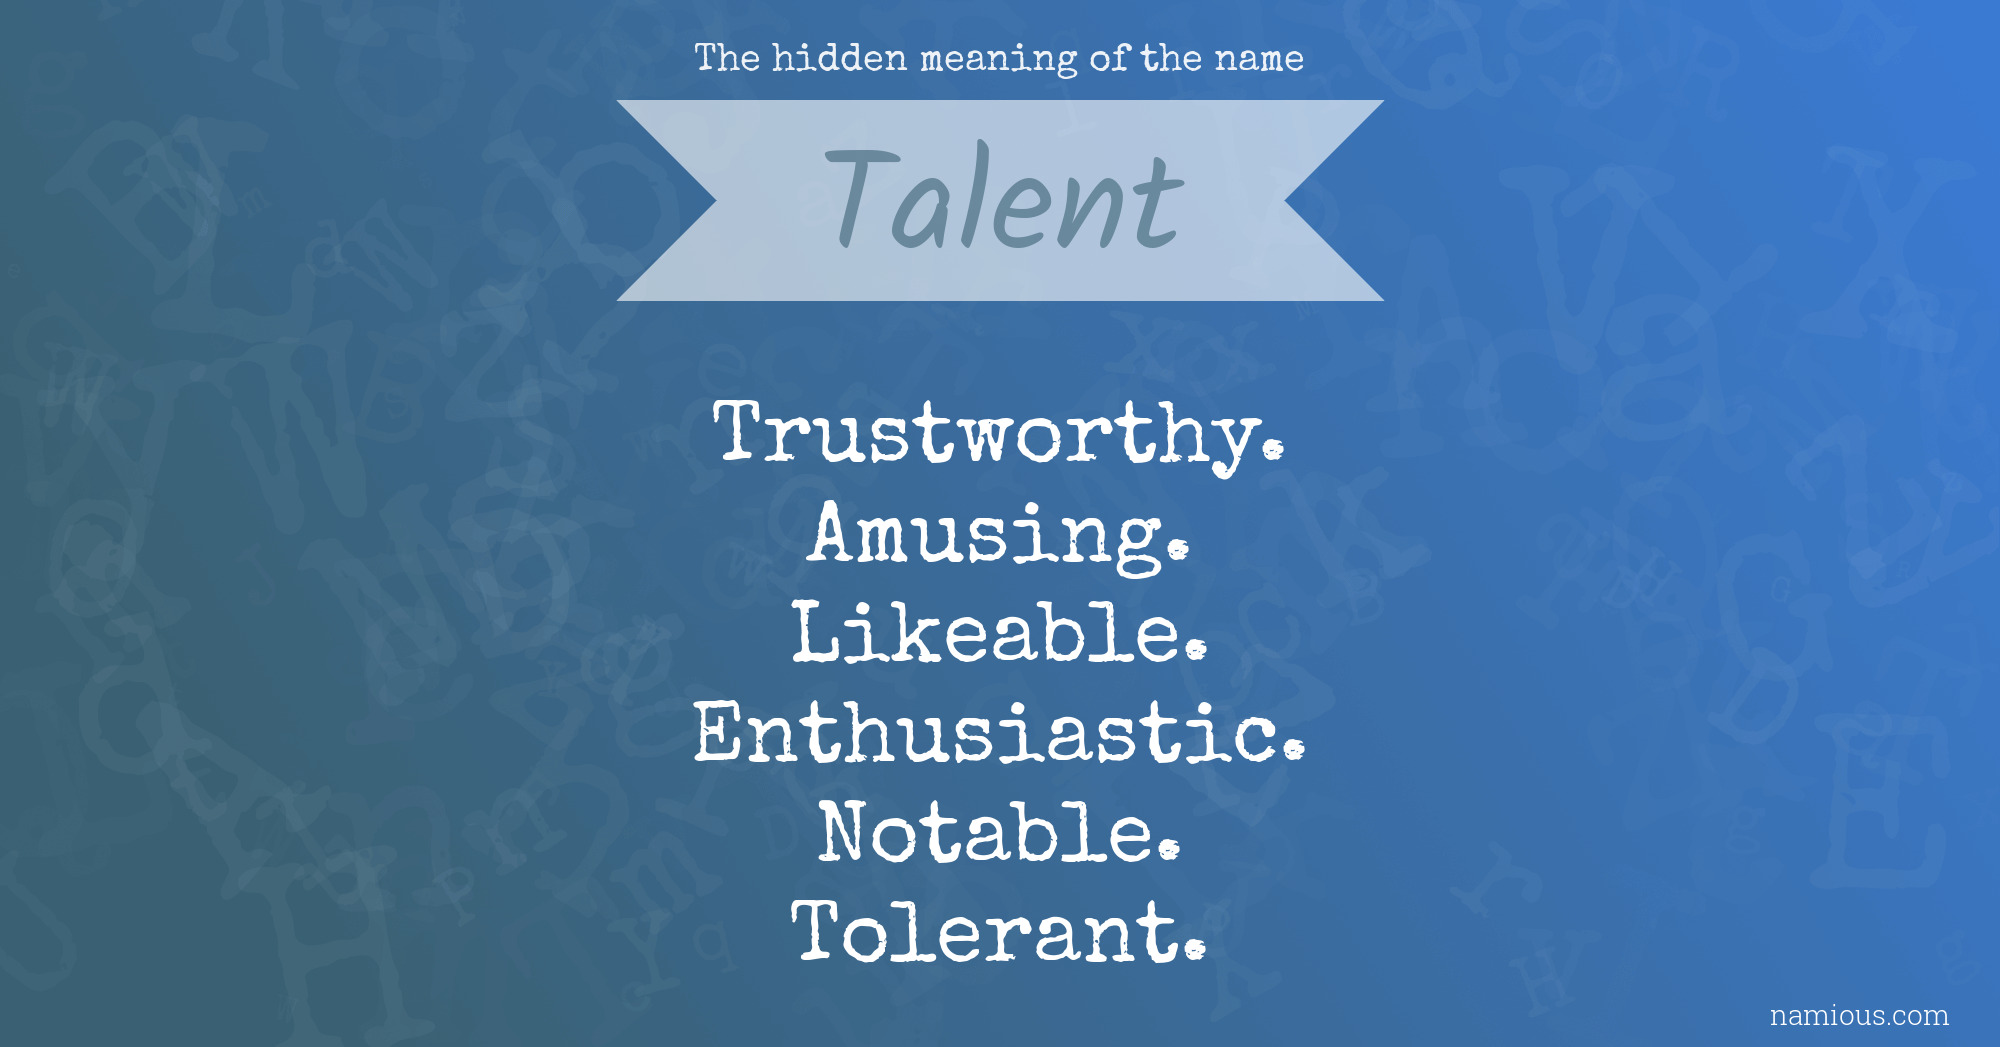 The hidden meaning of the name Talent